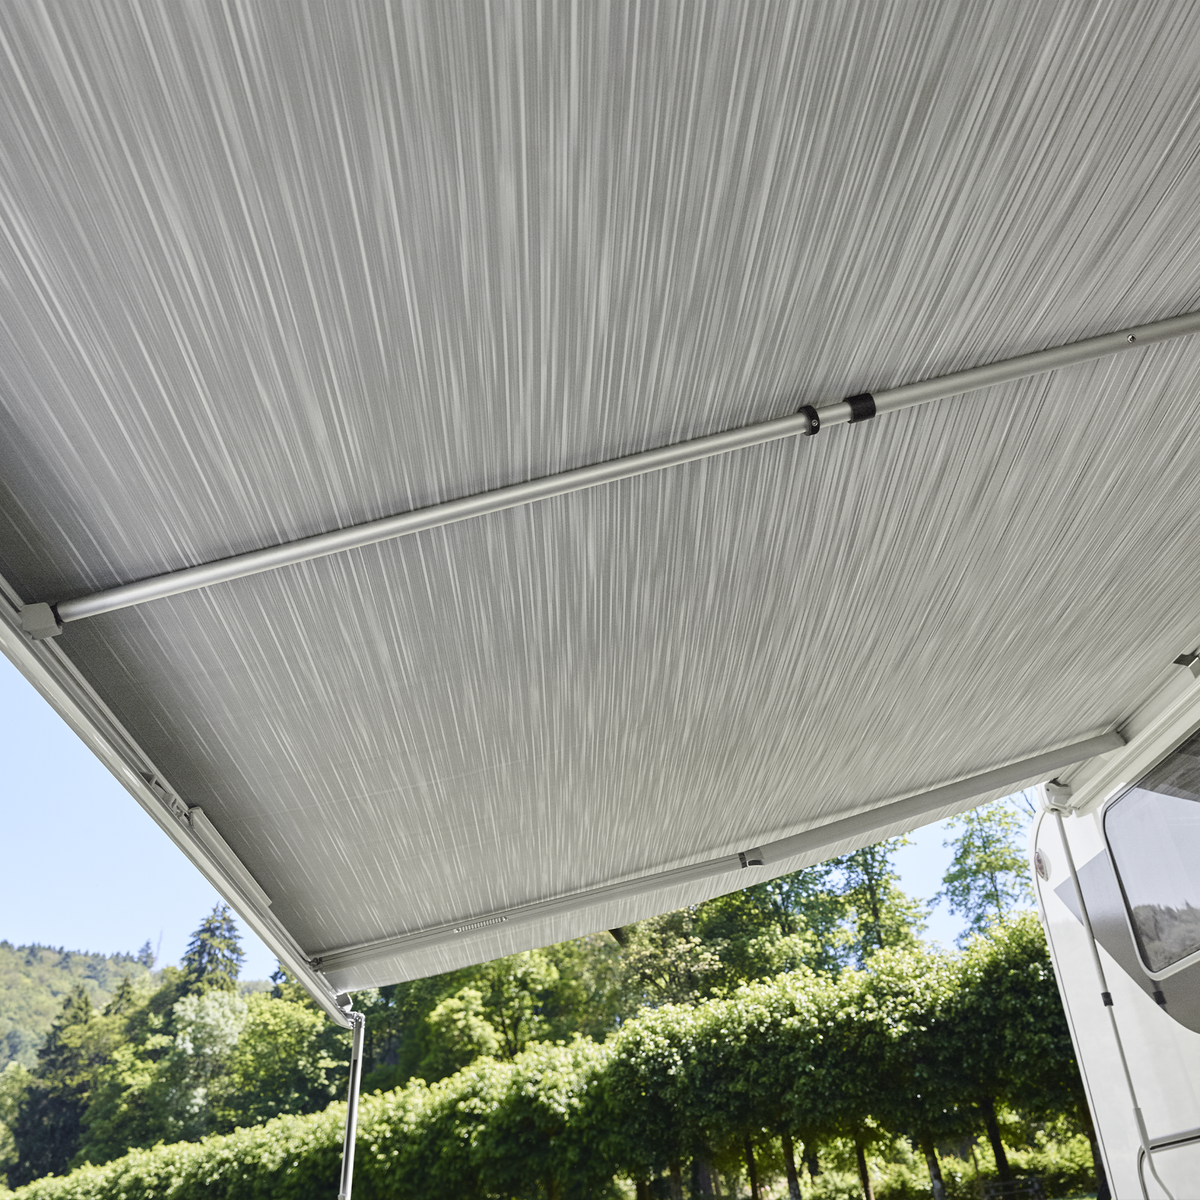 A Thule Tension Rafter G2 connected to a gray awning attached to an RV.